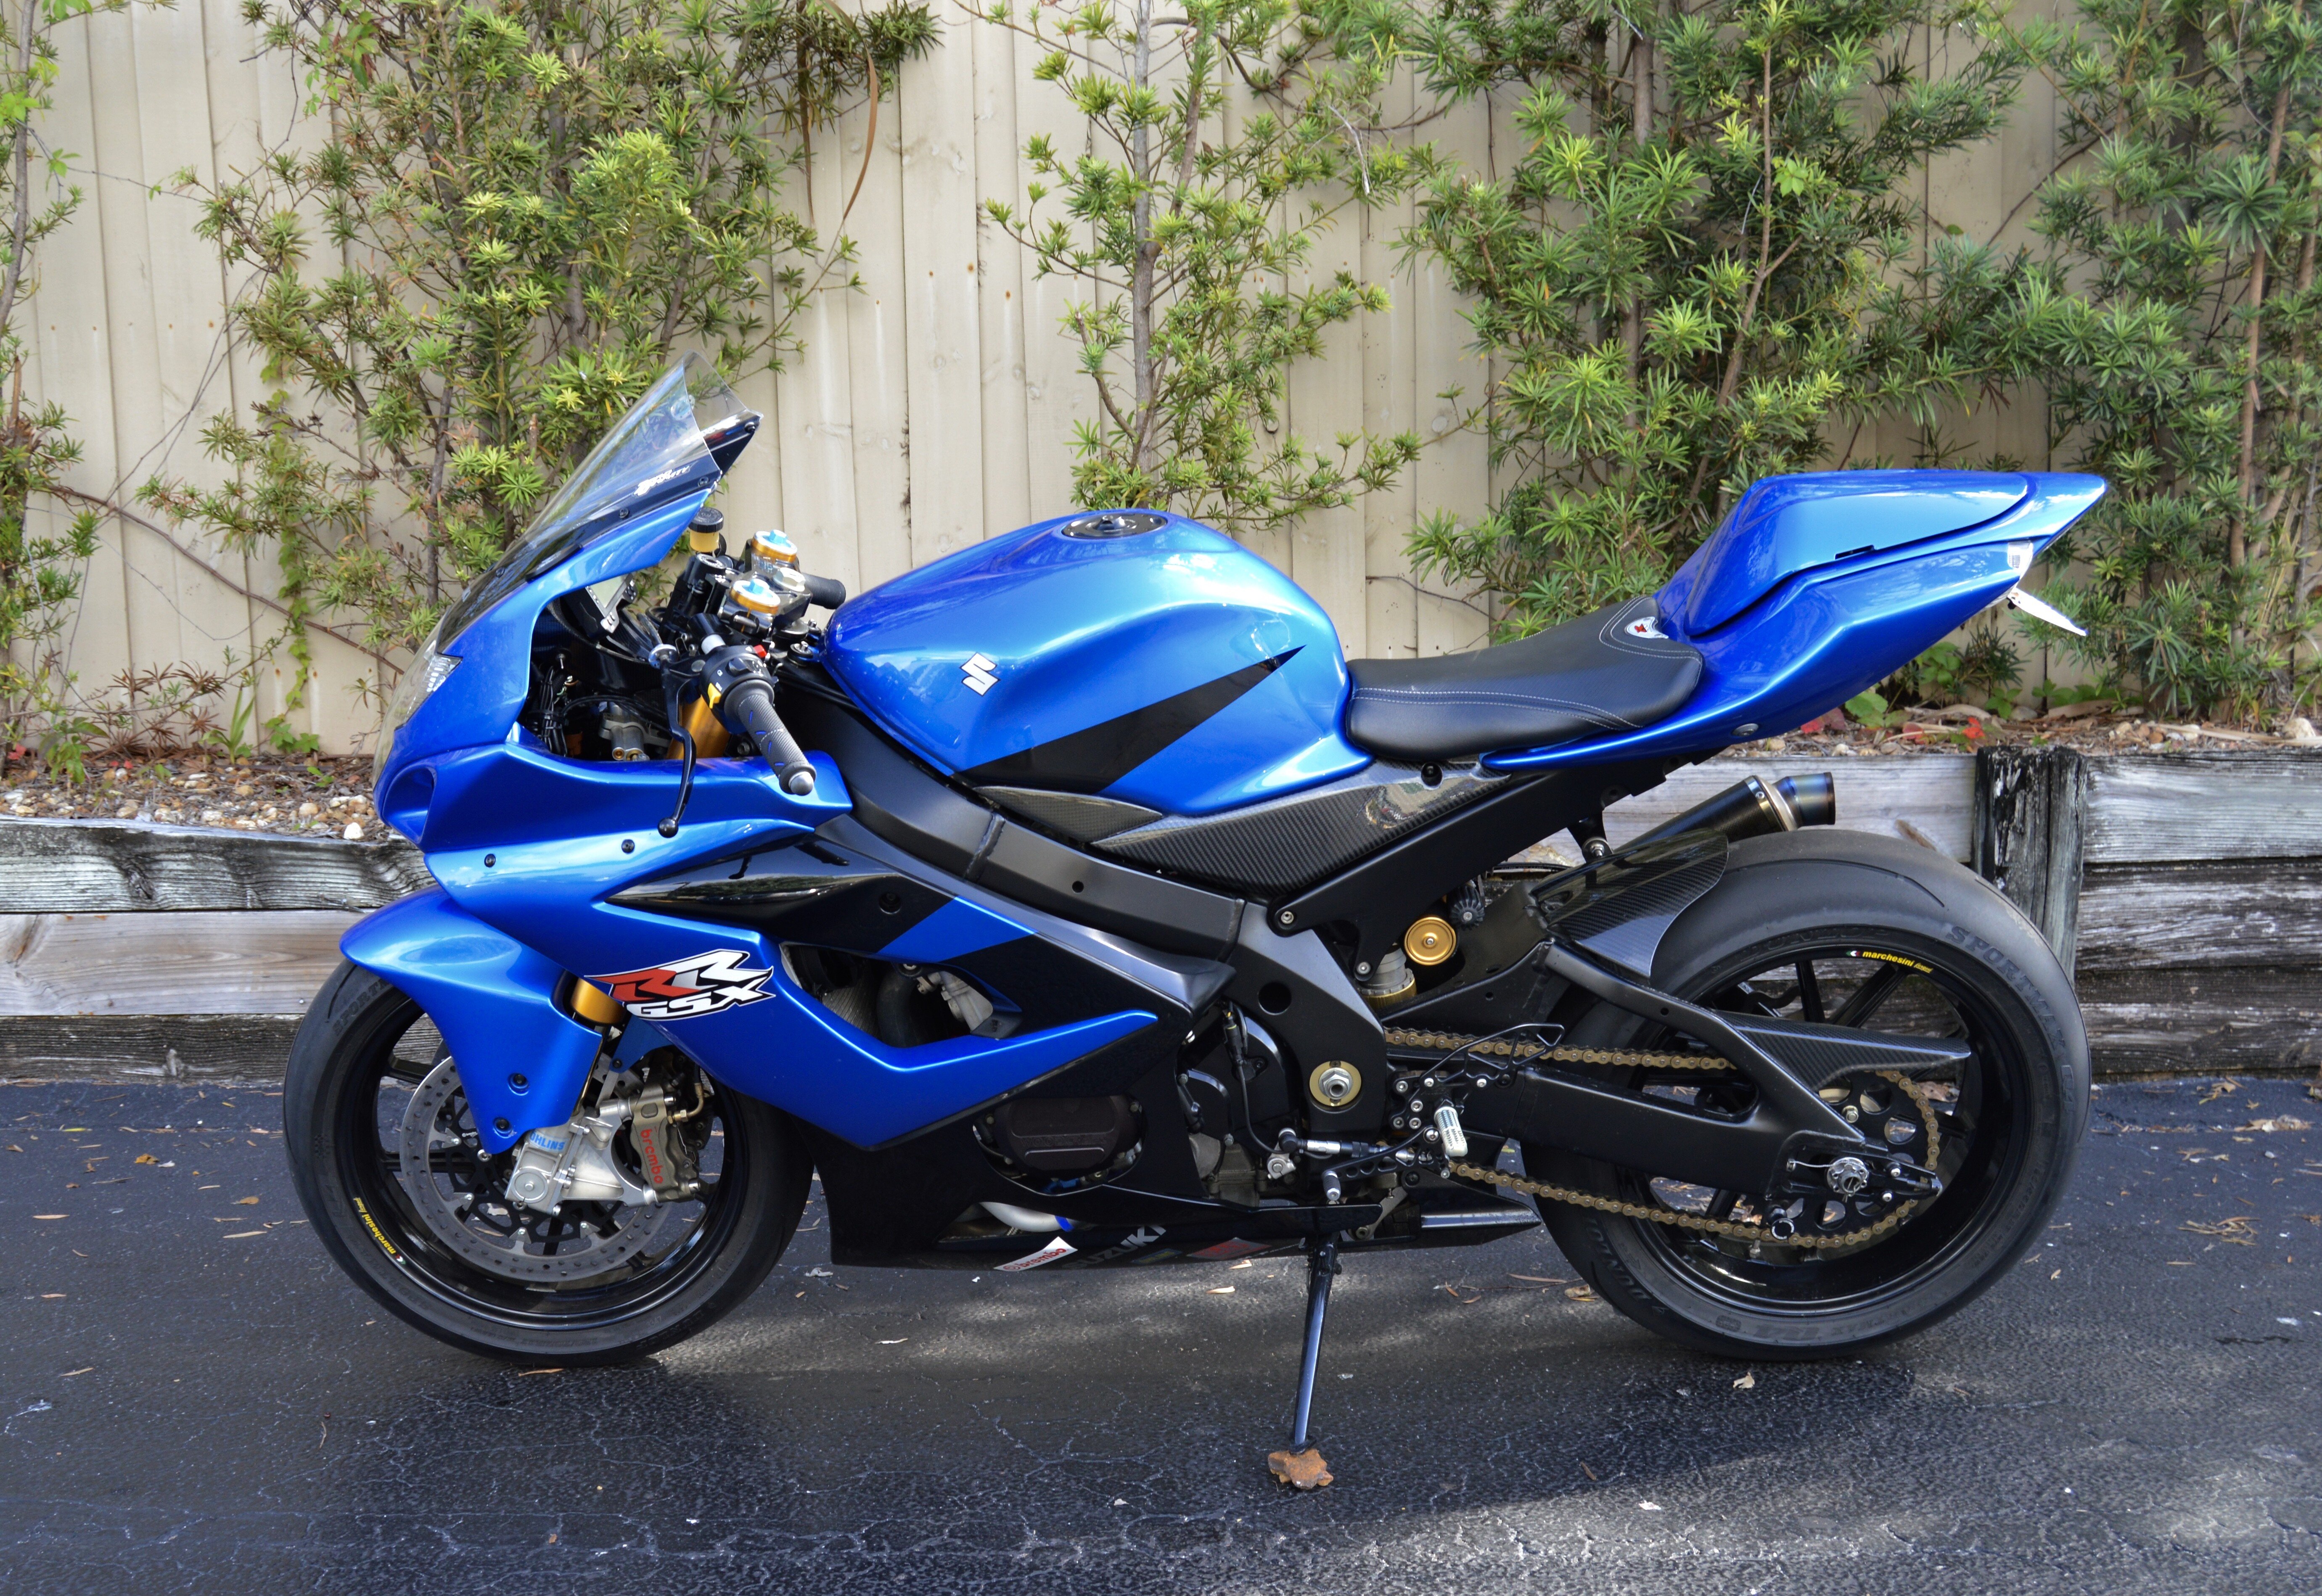 2008 gsxr1000 for sale near me